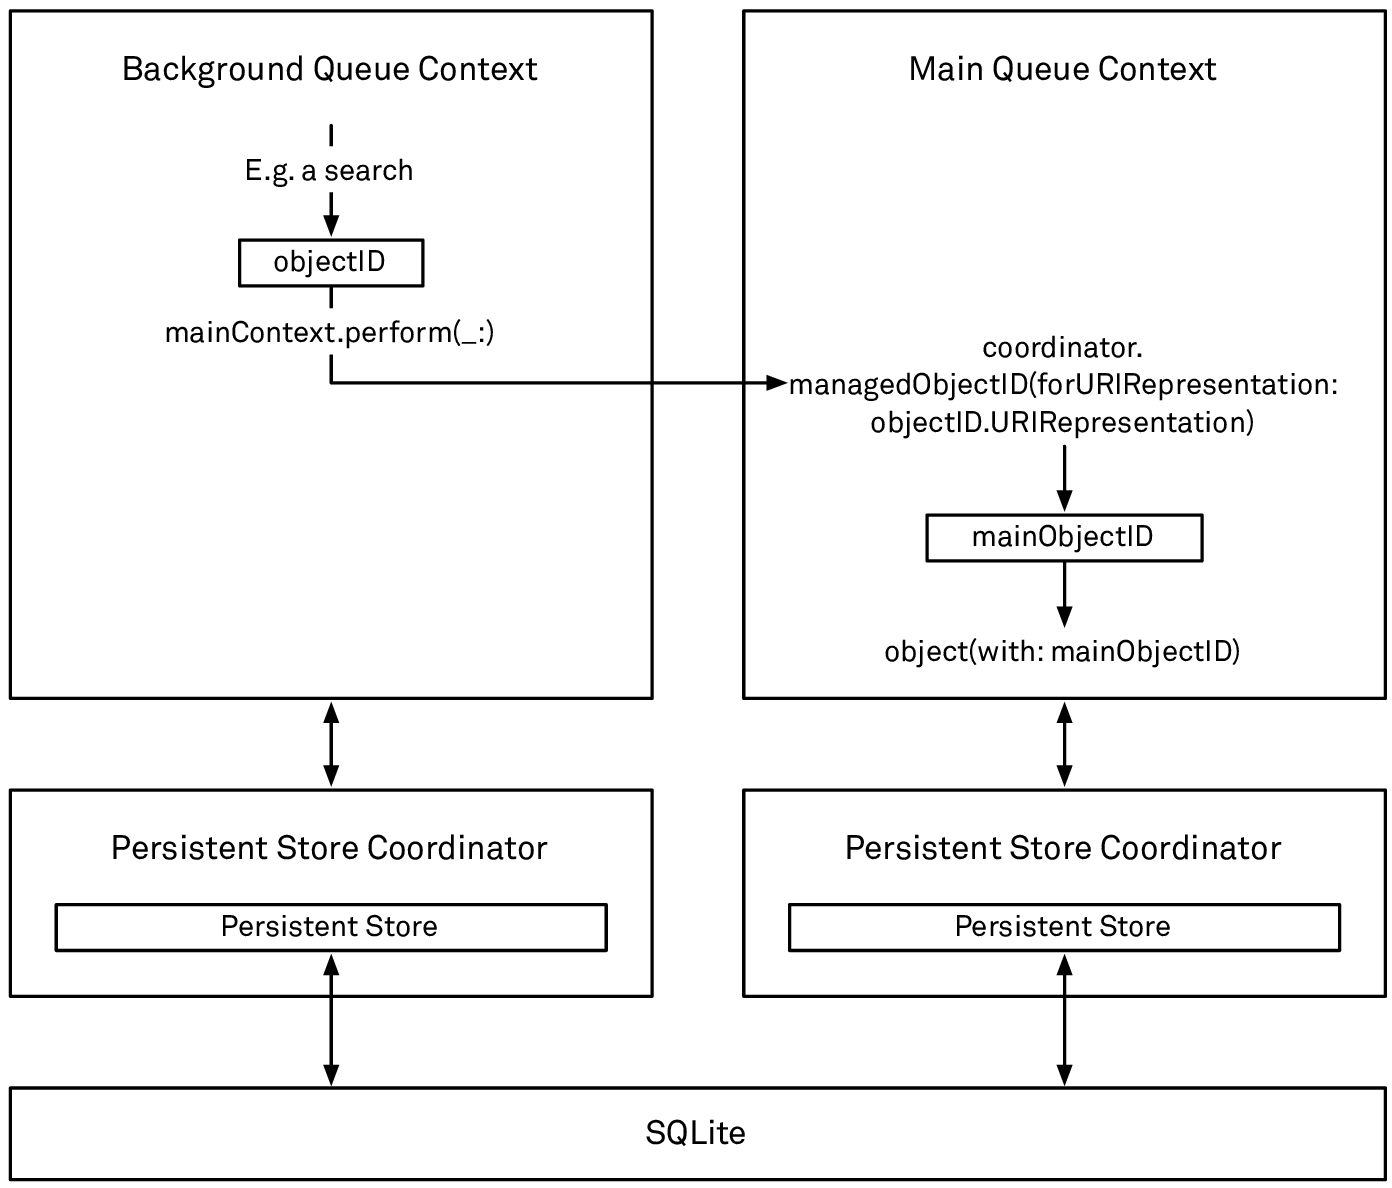 Handing a managed object between two contexts connected to different persistent store coordinators